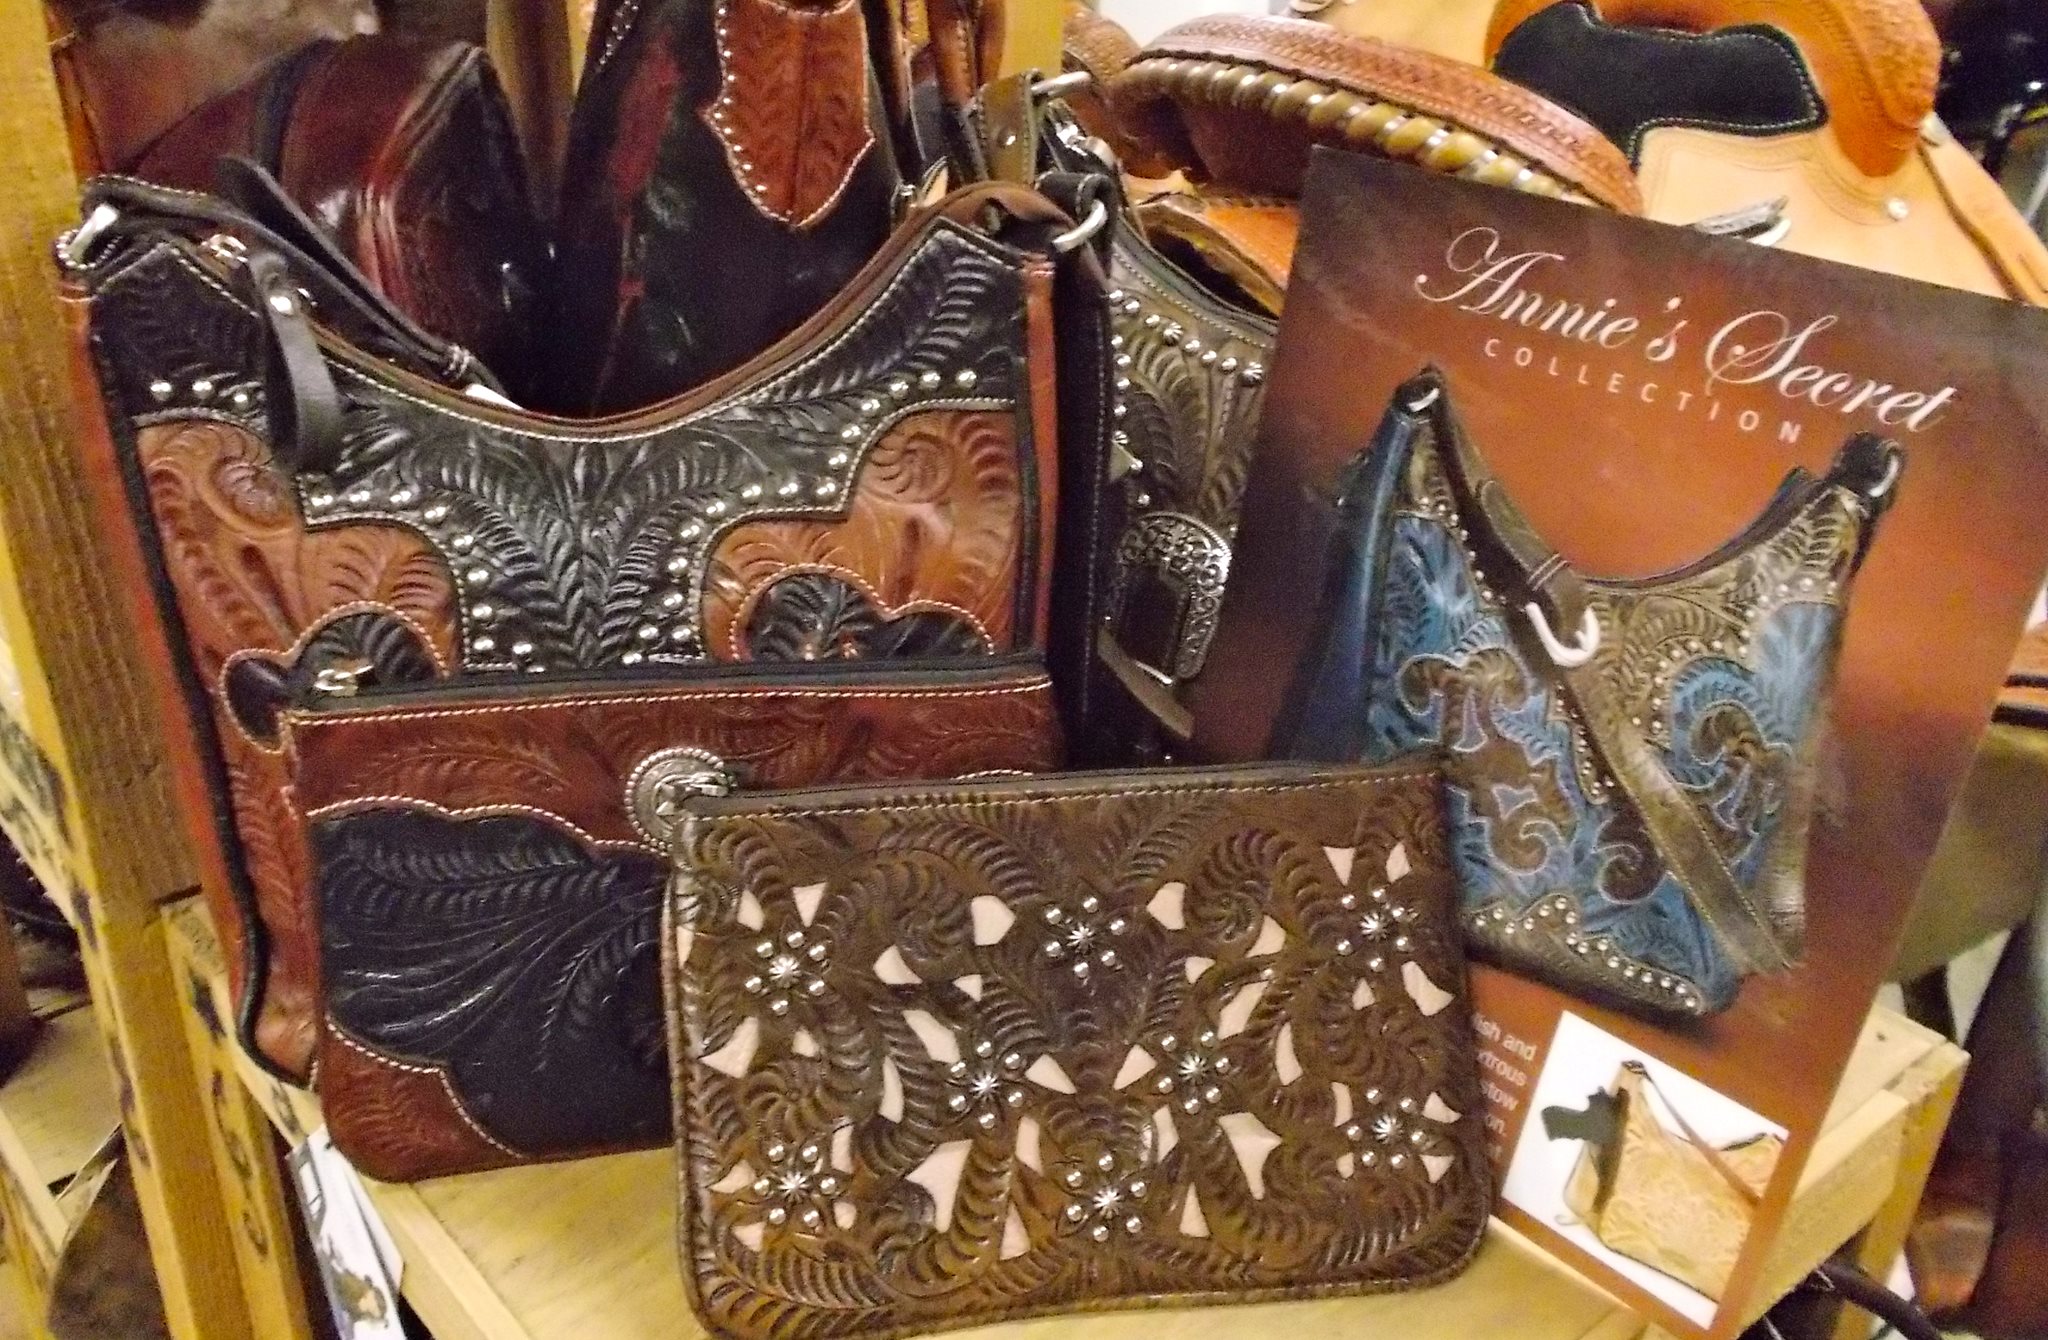 You will also find genuine leather purses and a complete line of men’s, women’s and kids belts.  Not to mention we have a large selection of home decor items like dishes, mugs, towels and more.